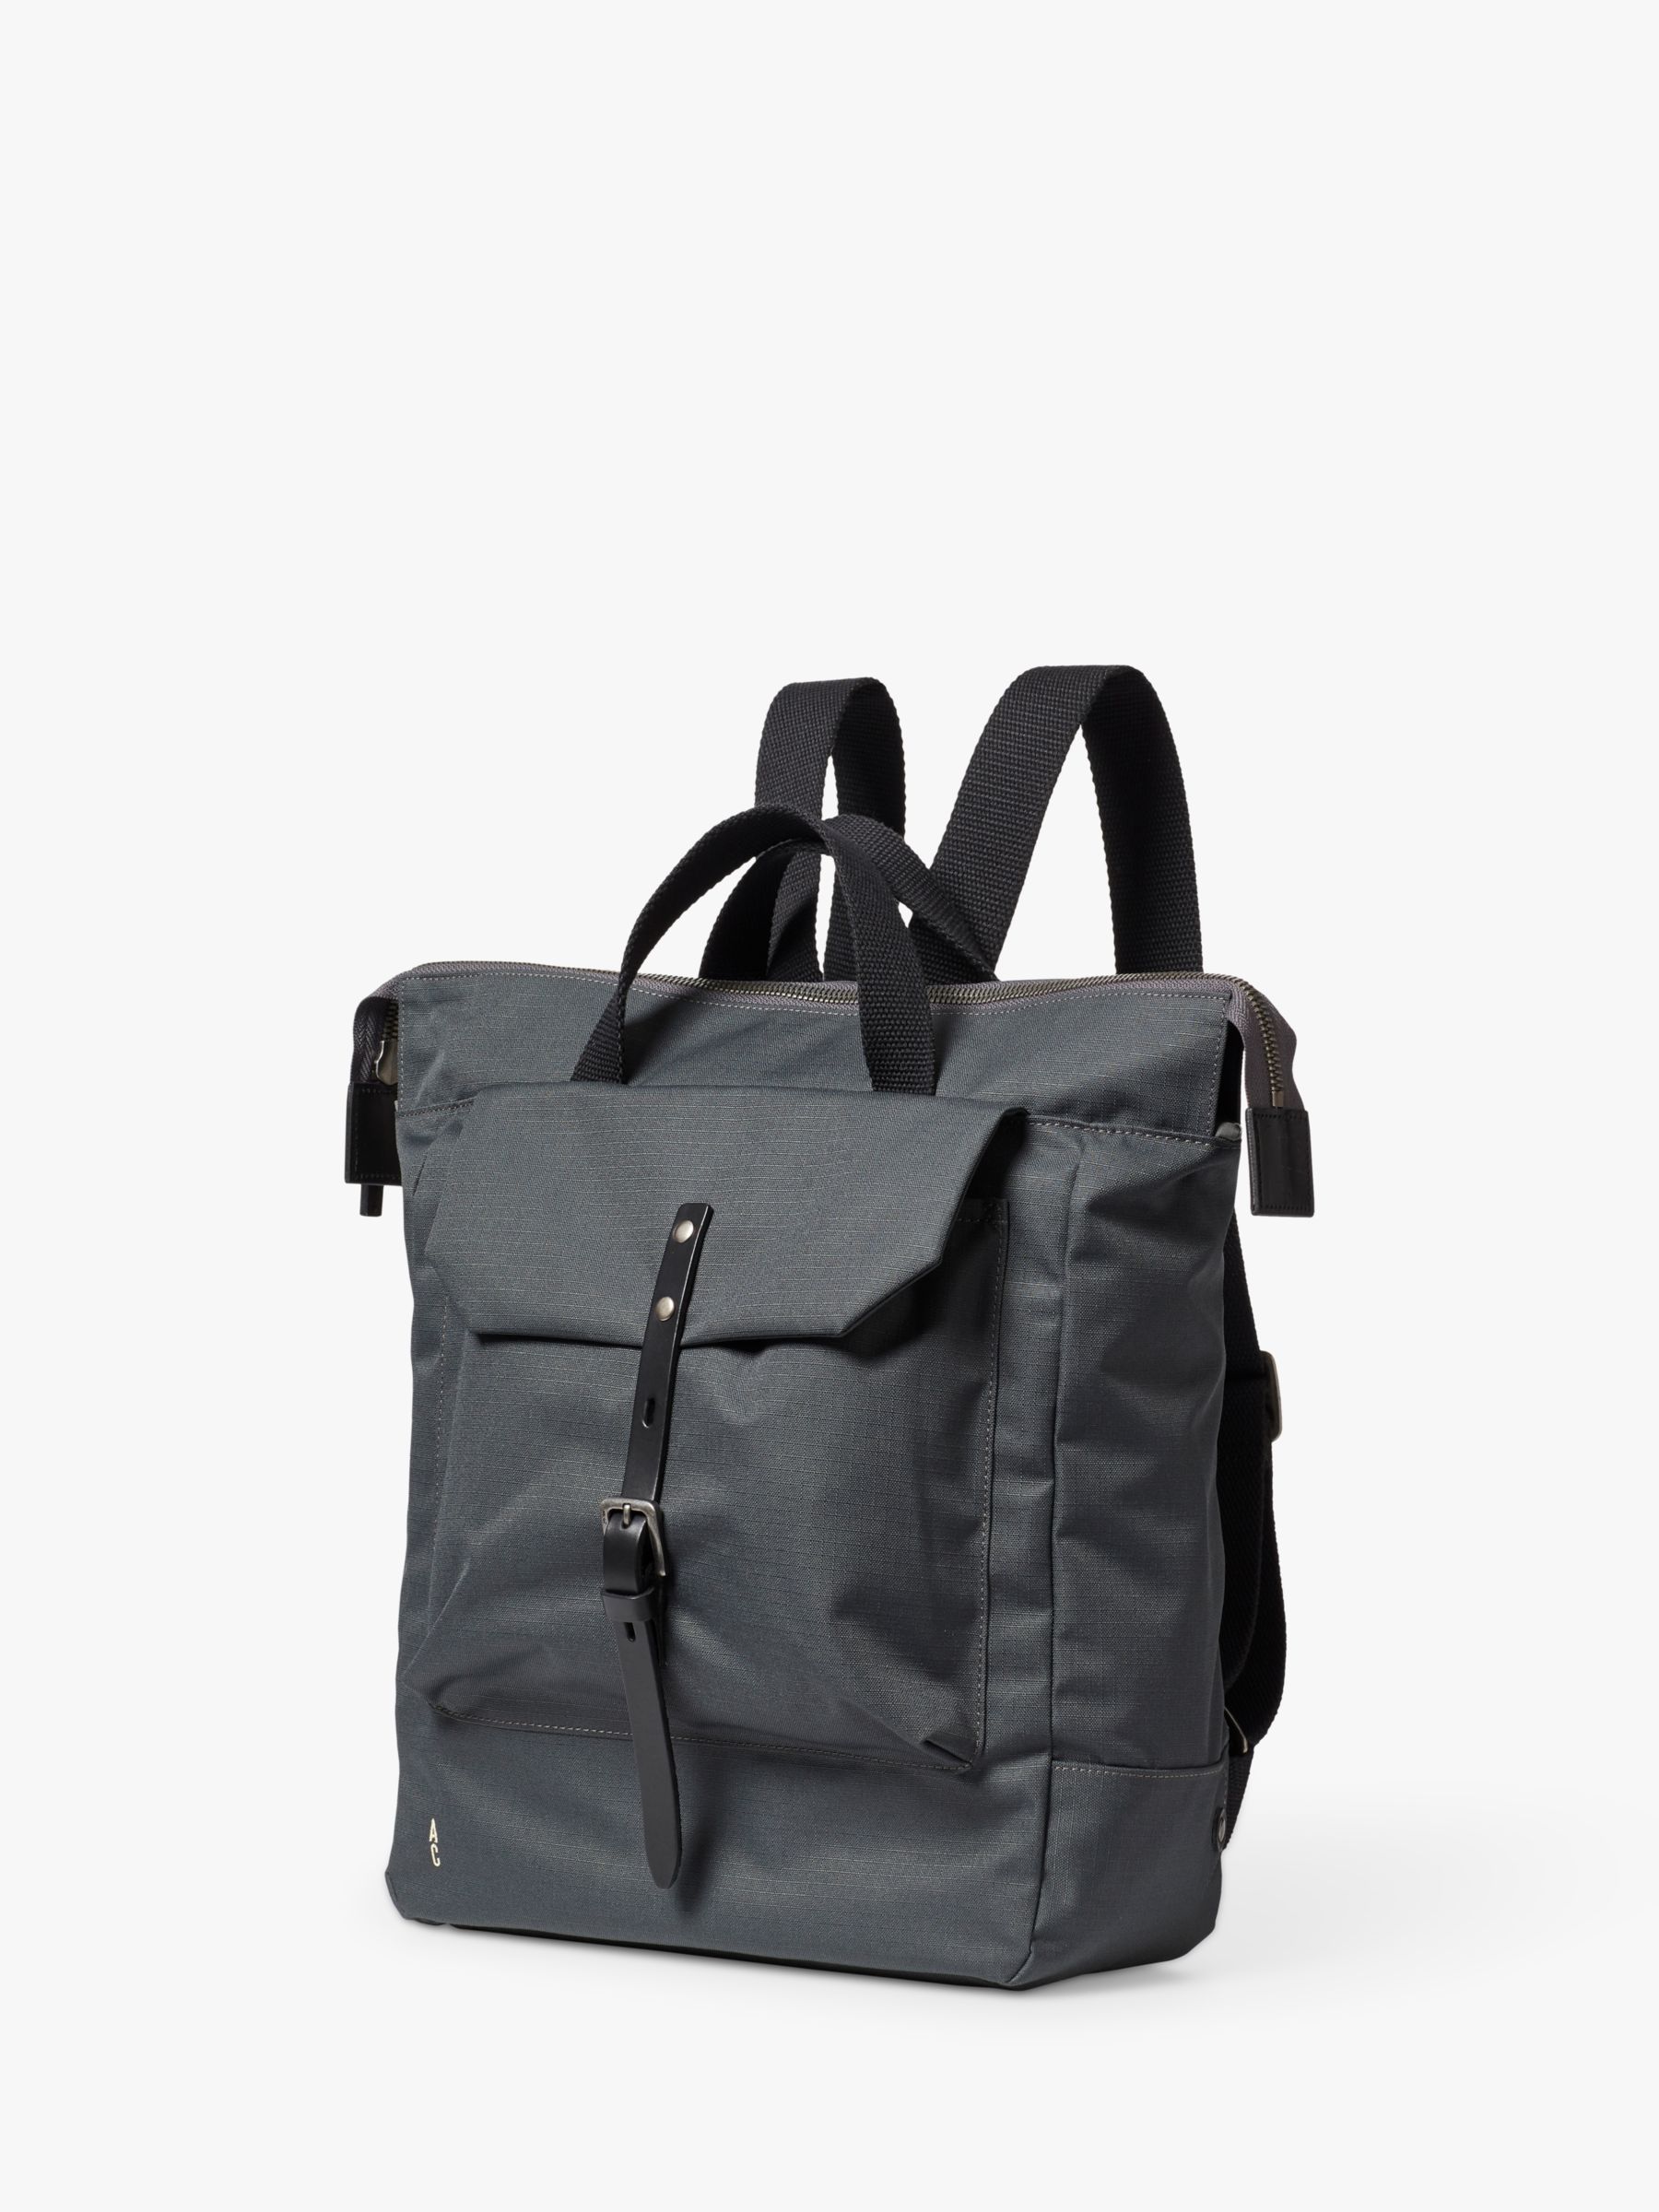 Buy Ally Capellino Frances Waxed Cotton Backpack Online at johnlewis.com